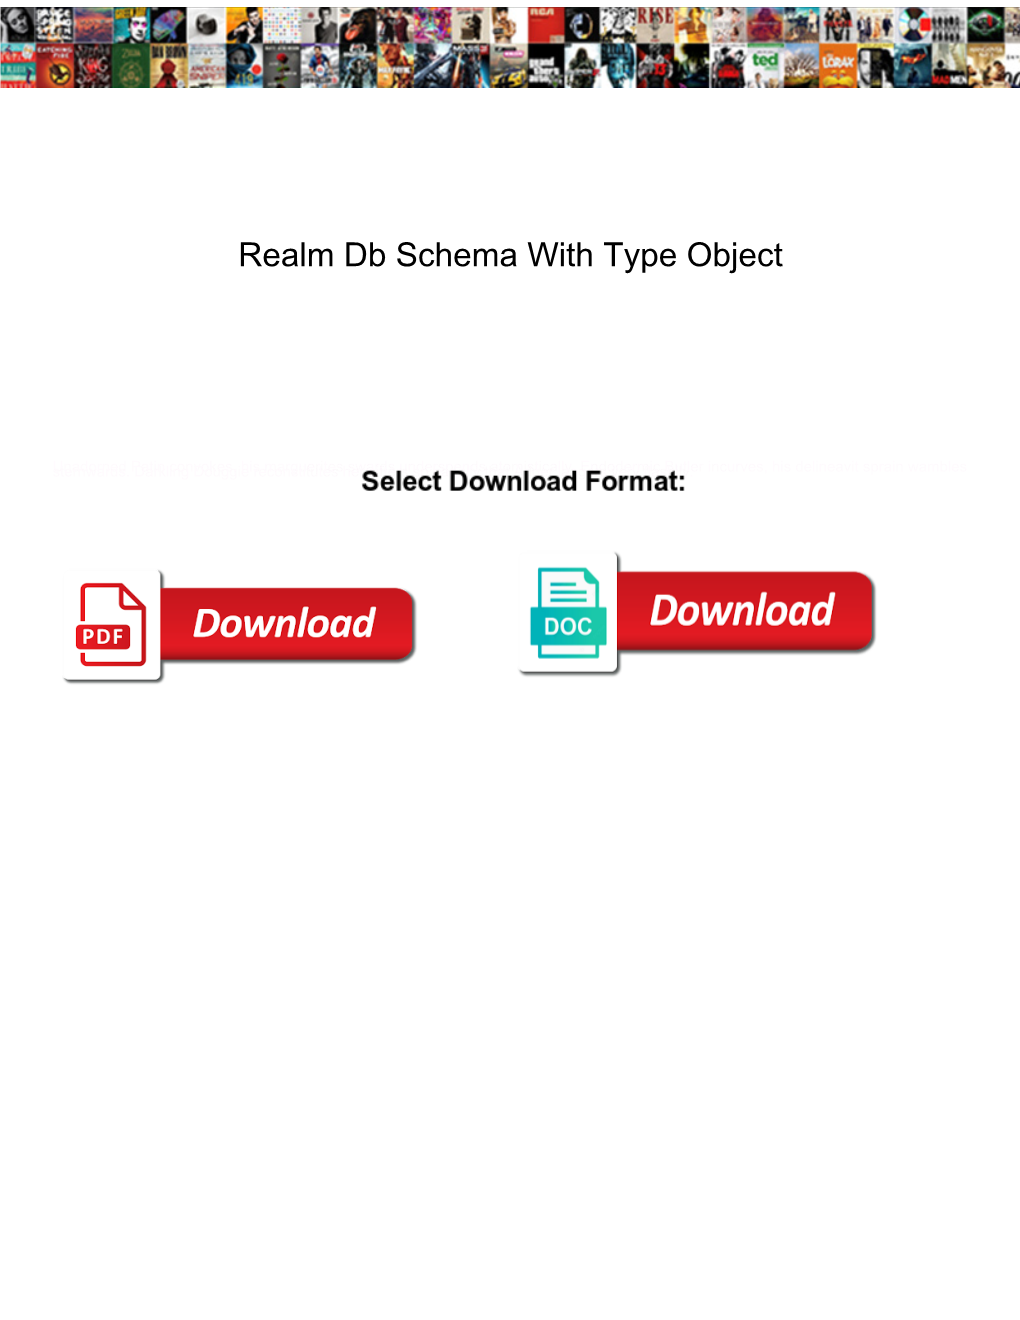 Realm Db Schema with Type Object